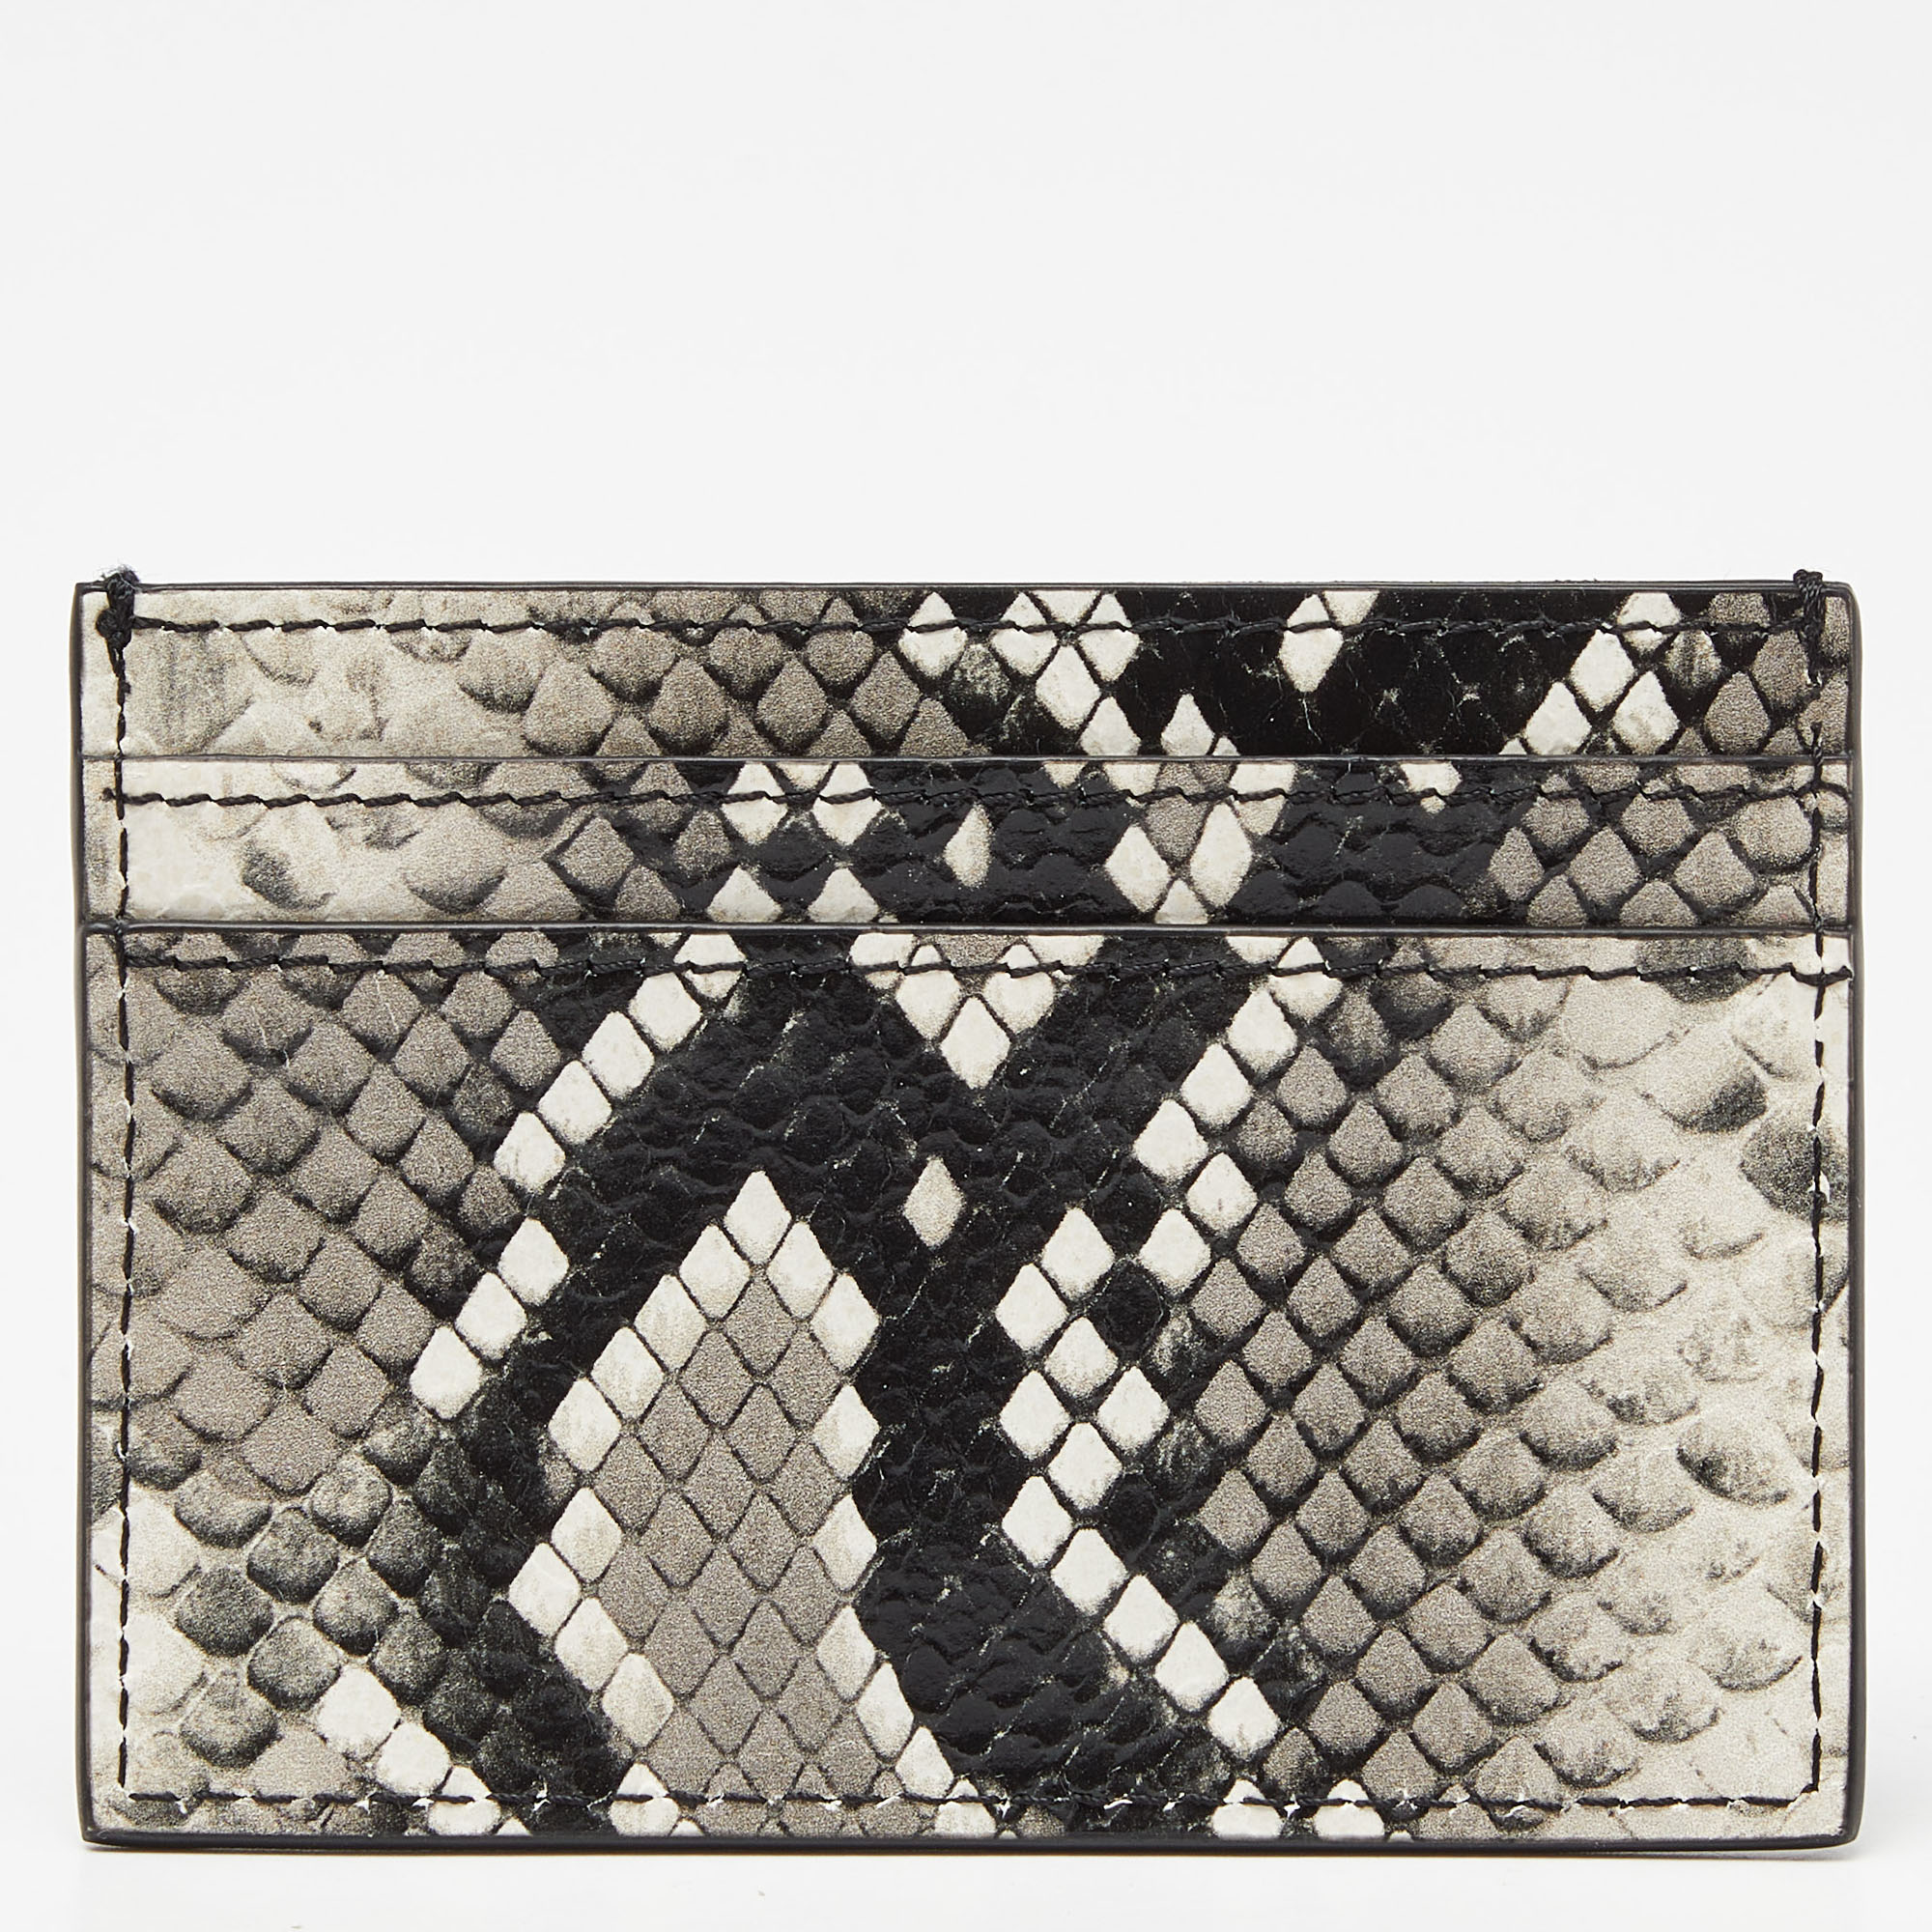 Moschino Grey/White Snakeskin Embossed Leather Card Holder